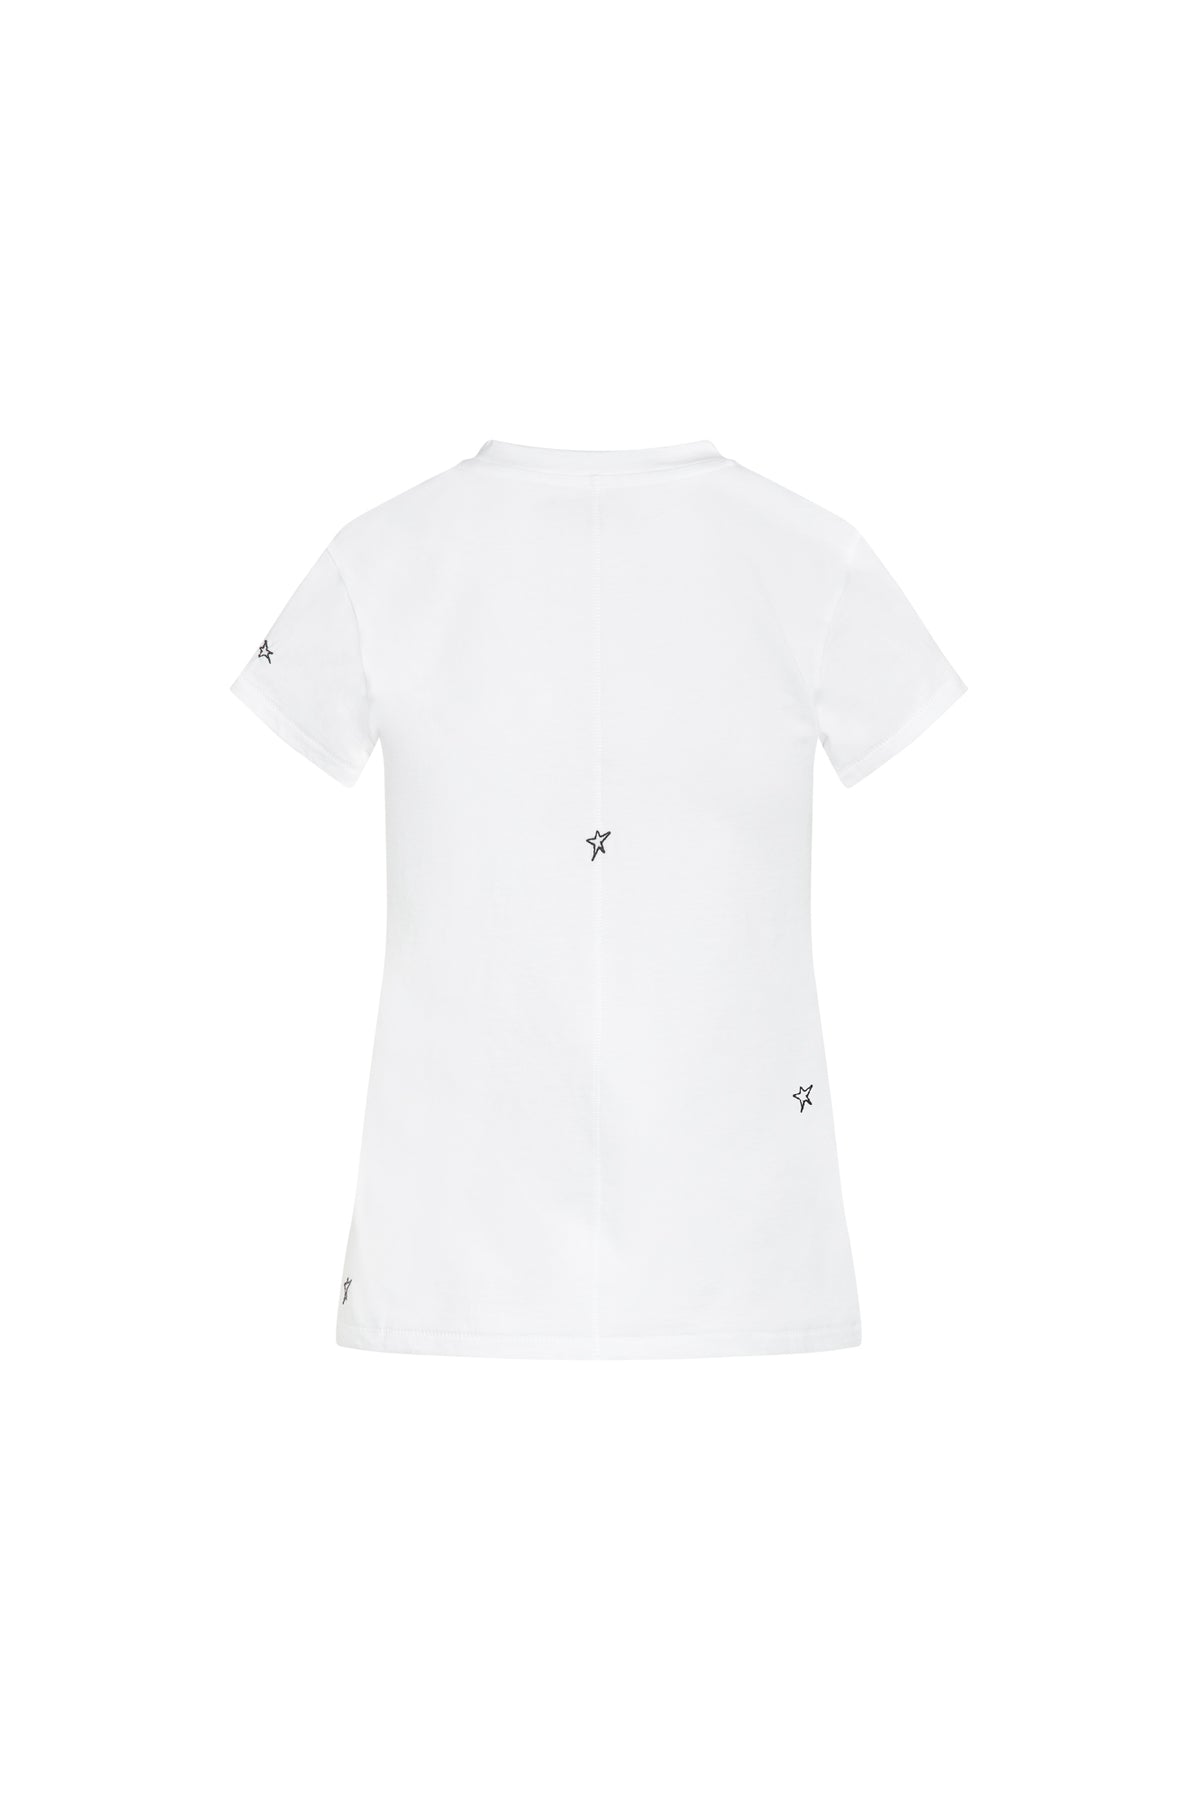 Catherine Gee Embroidered Cotton Tee - Star